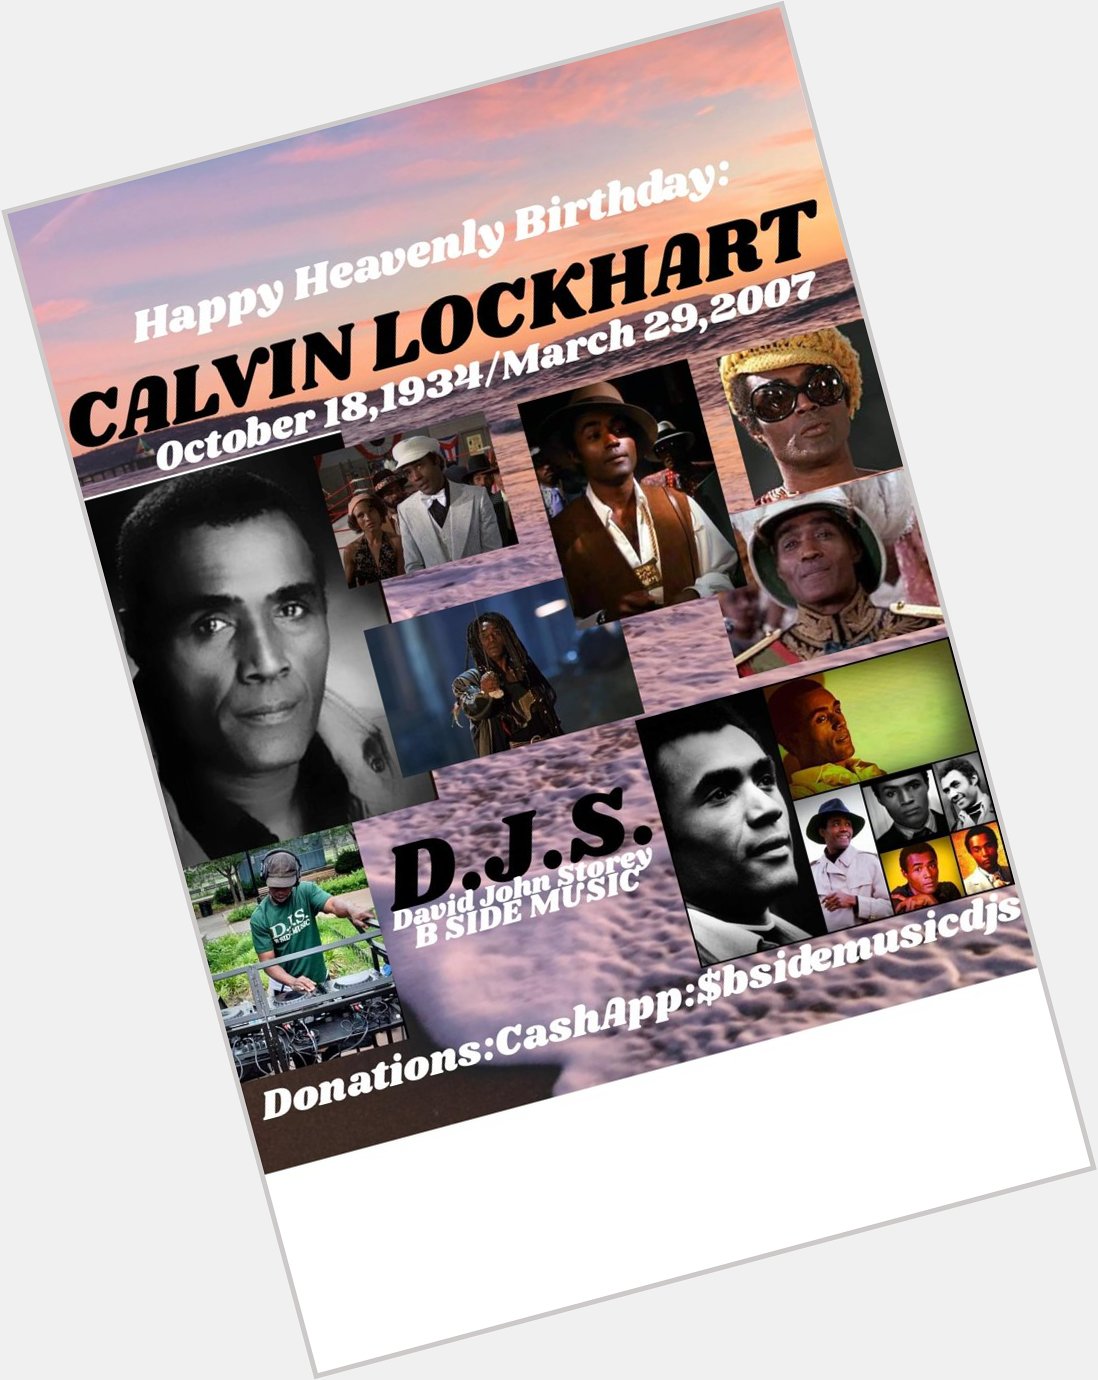 I(D.J.S.) taking time to say Happy Heavenly Birthday to Stage/Actor: \"CALVIN LOCKHART\". 